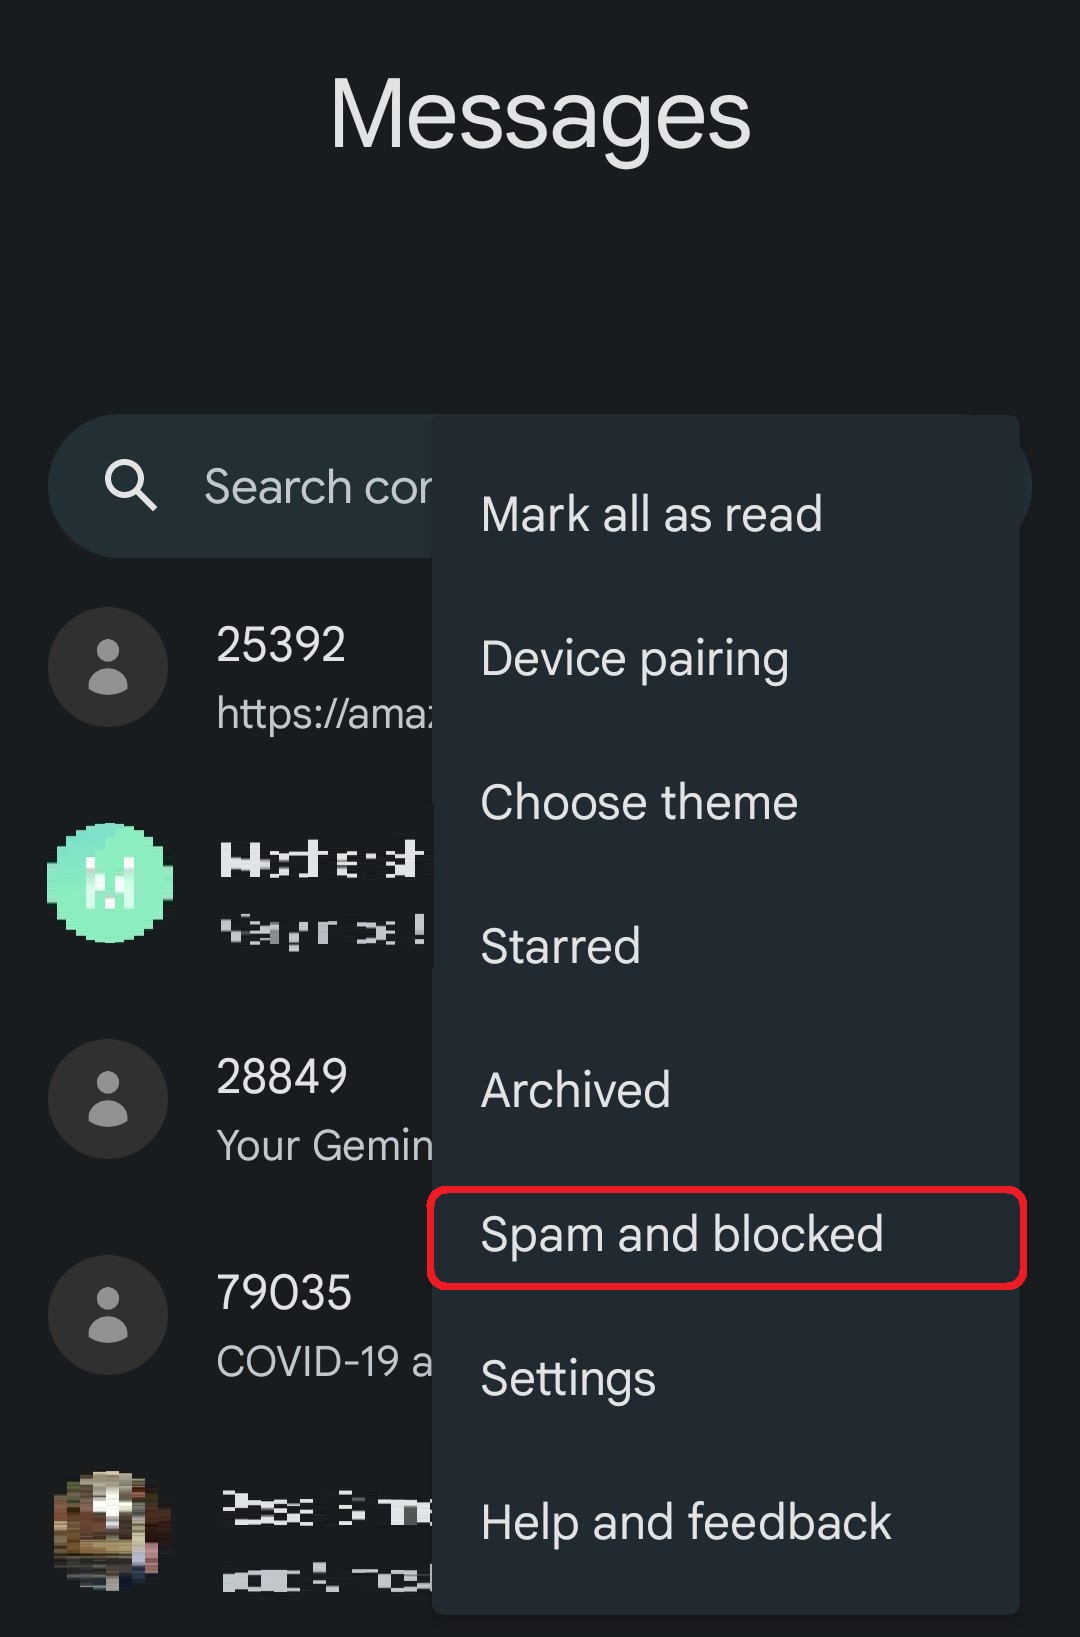 Spam and blocked messages